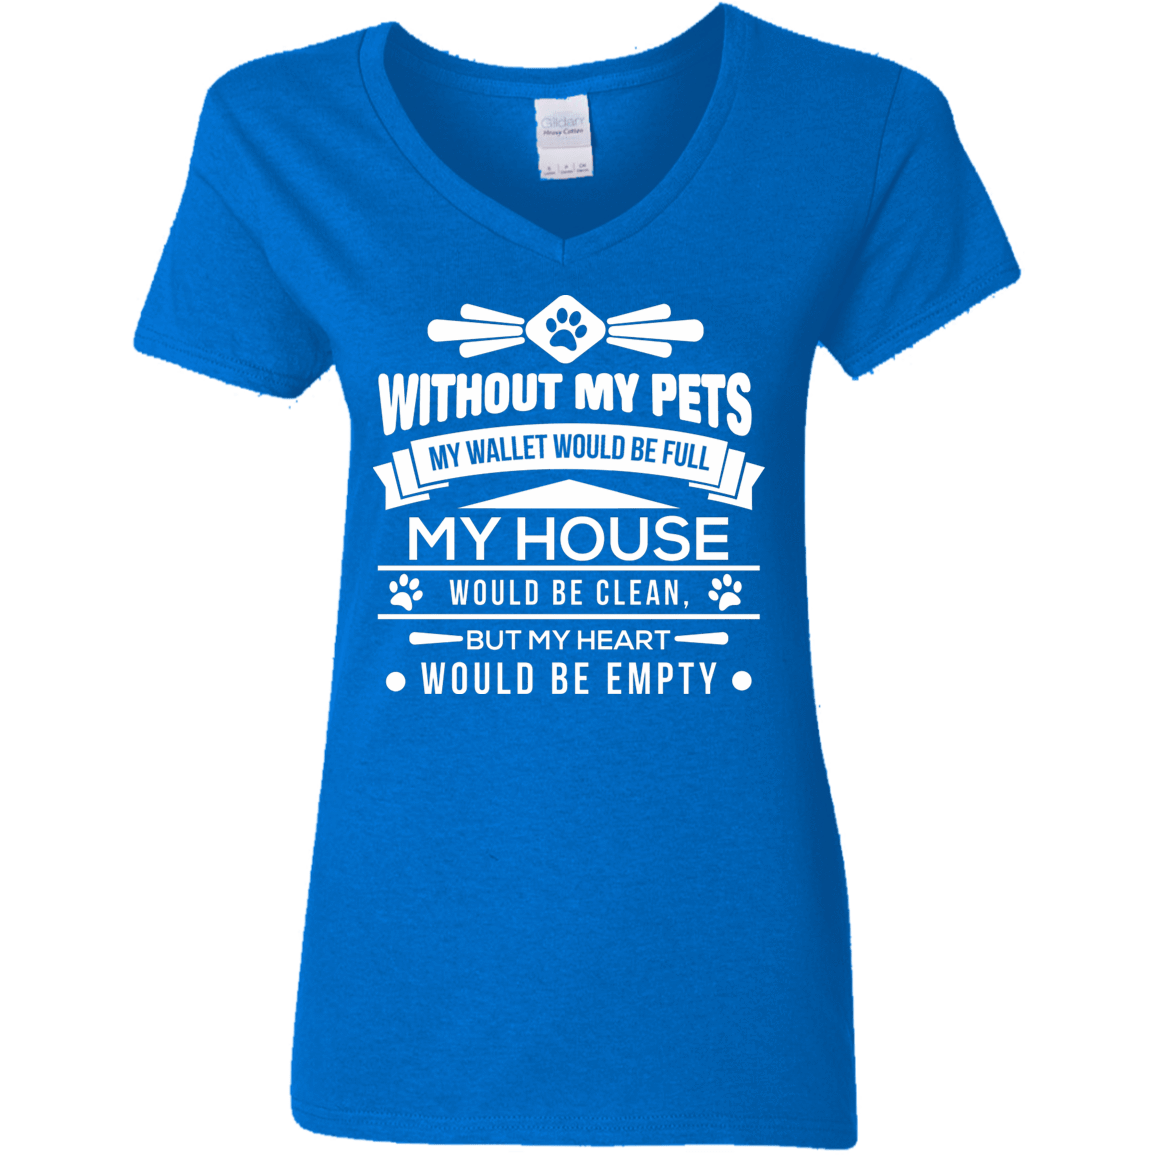 Without My Pets - Ladies V Neck.